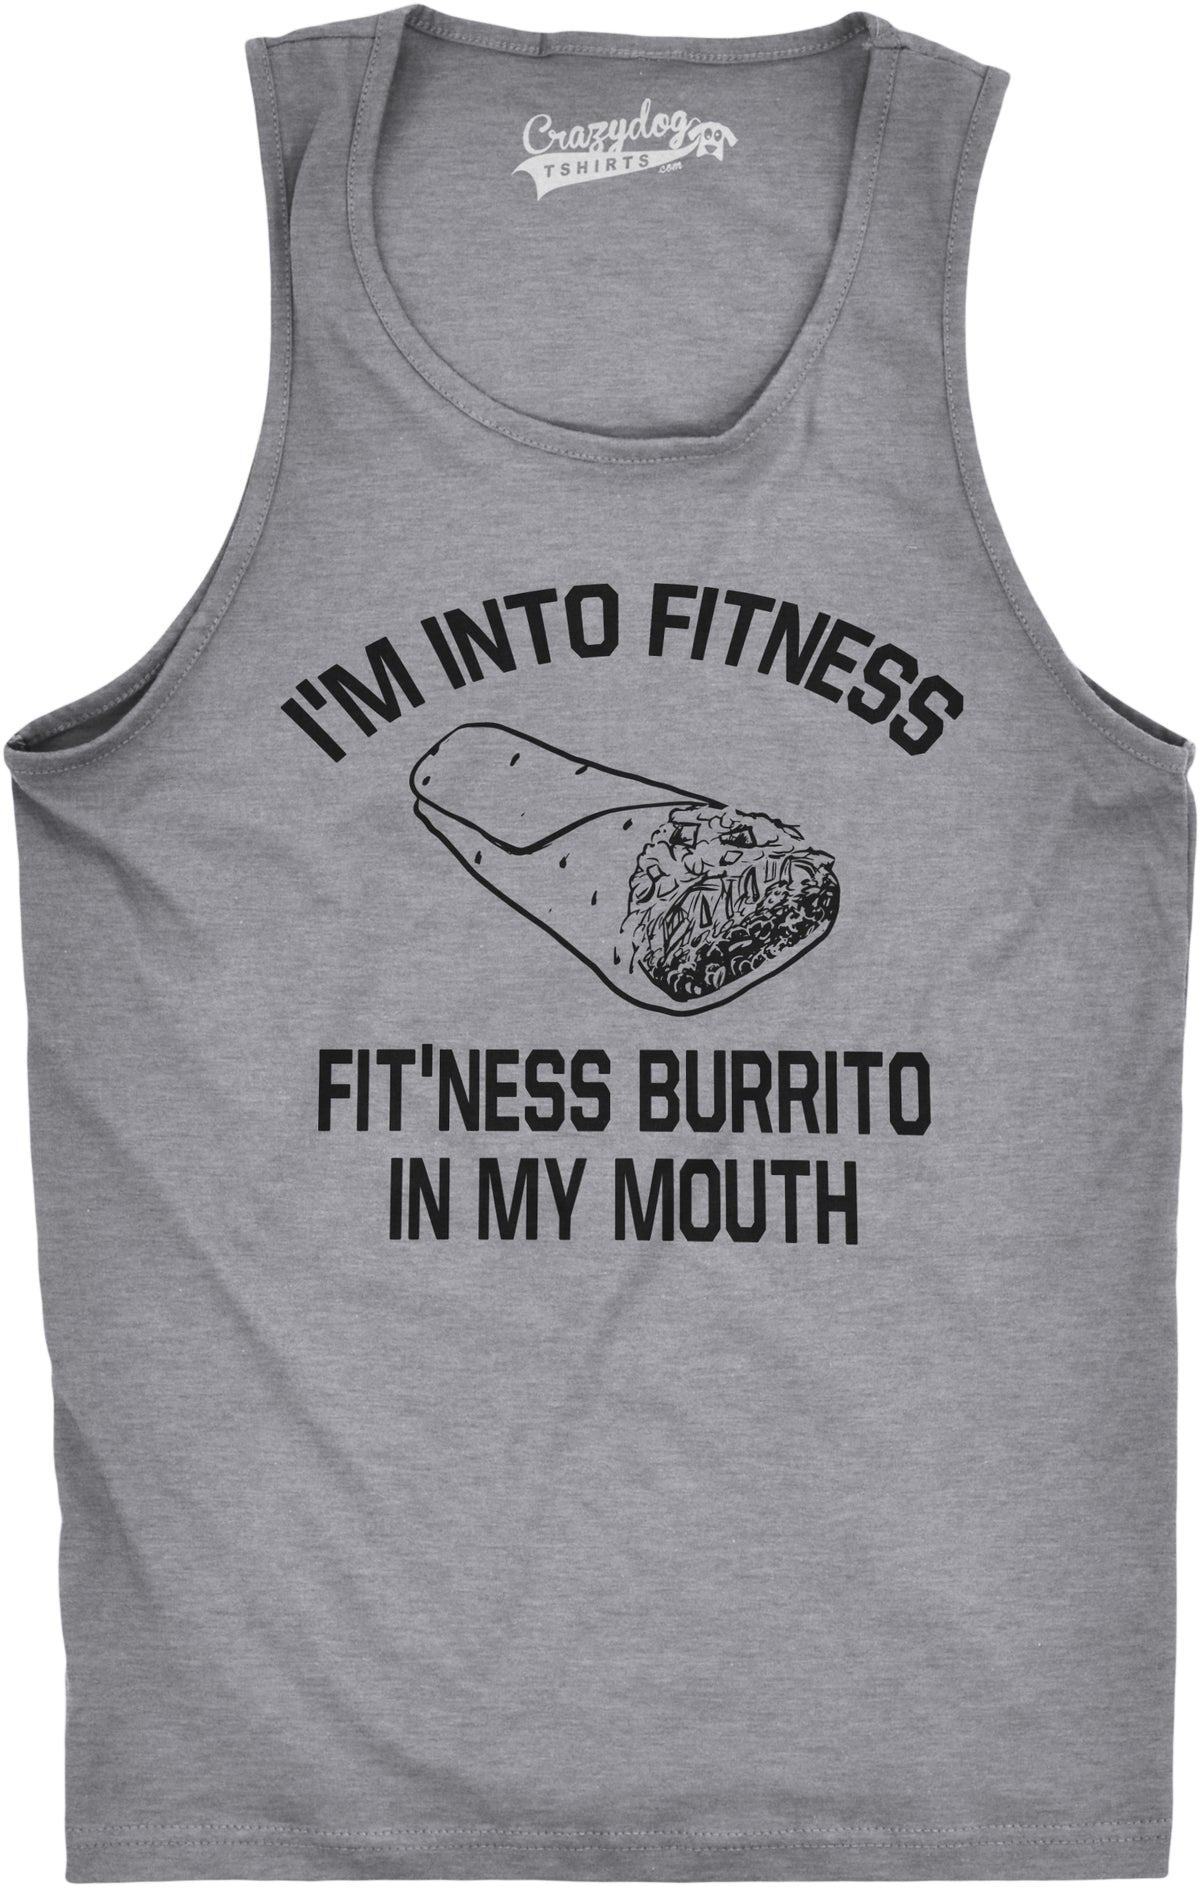 Funny Light Heather Grey Fitness Burrito In My Mouth Mens Tank Top Nerdy Cinco De Mayo Fitness Food Sarcastic Tee